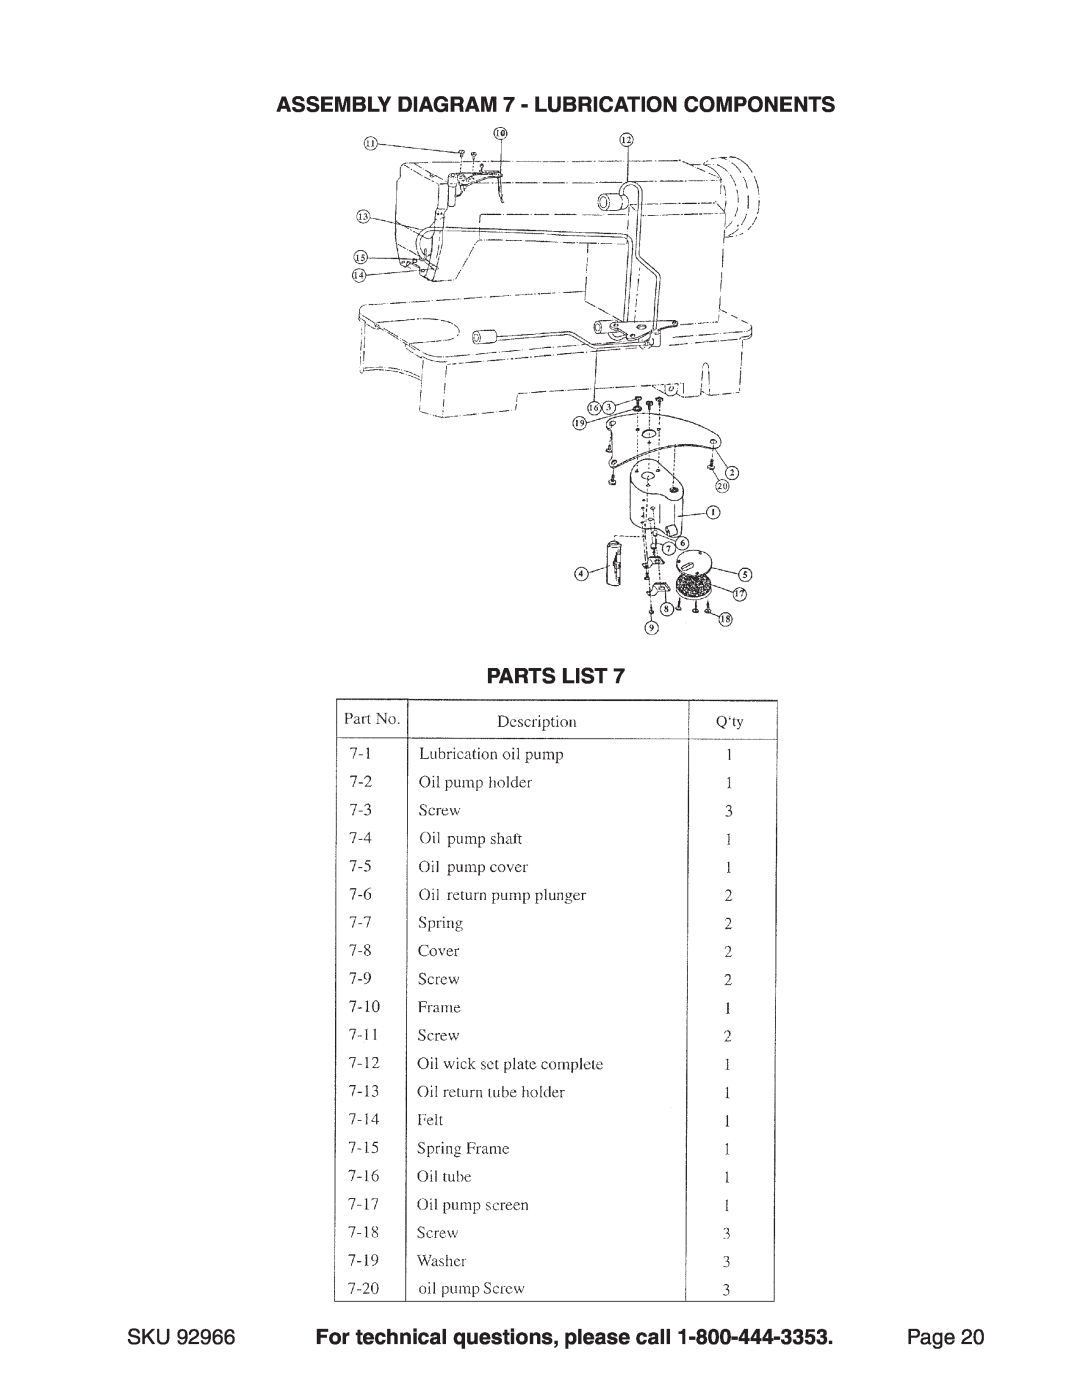 Harbor Freight Tools 92966 ASSEMBLY Diagram 7 - Lubrication Components, Parts List, For technical questions, please call 